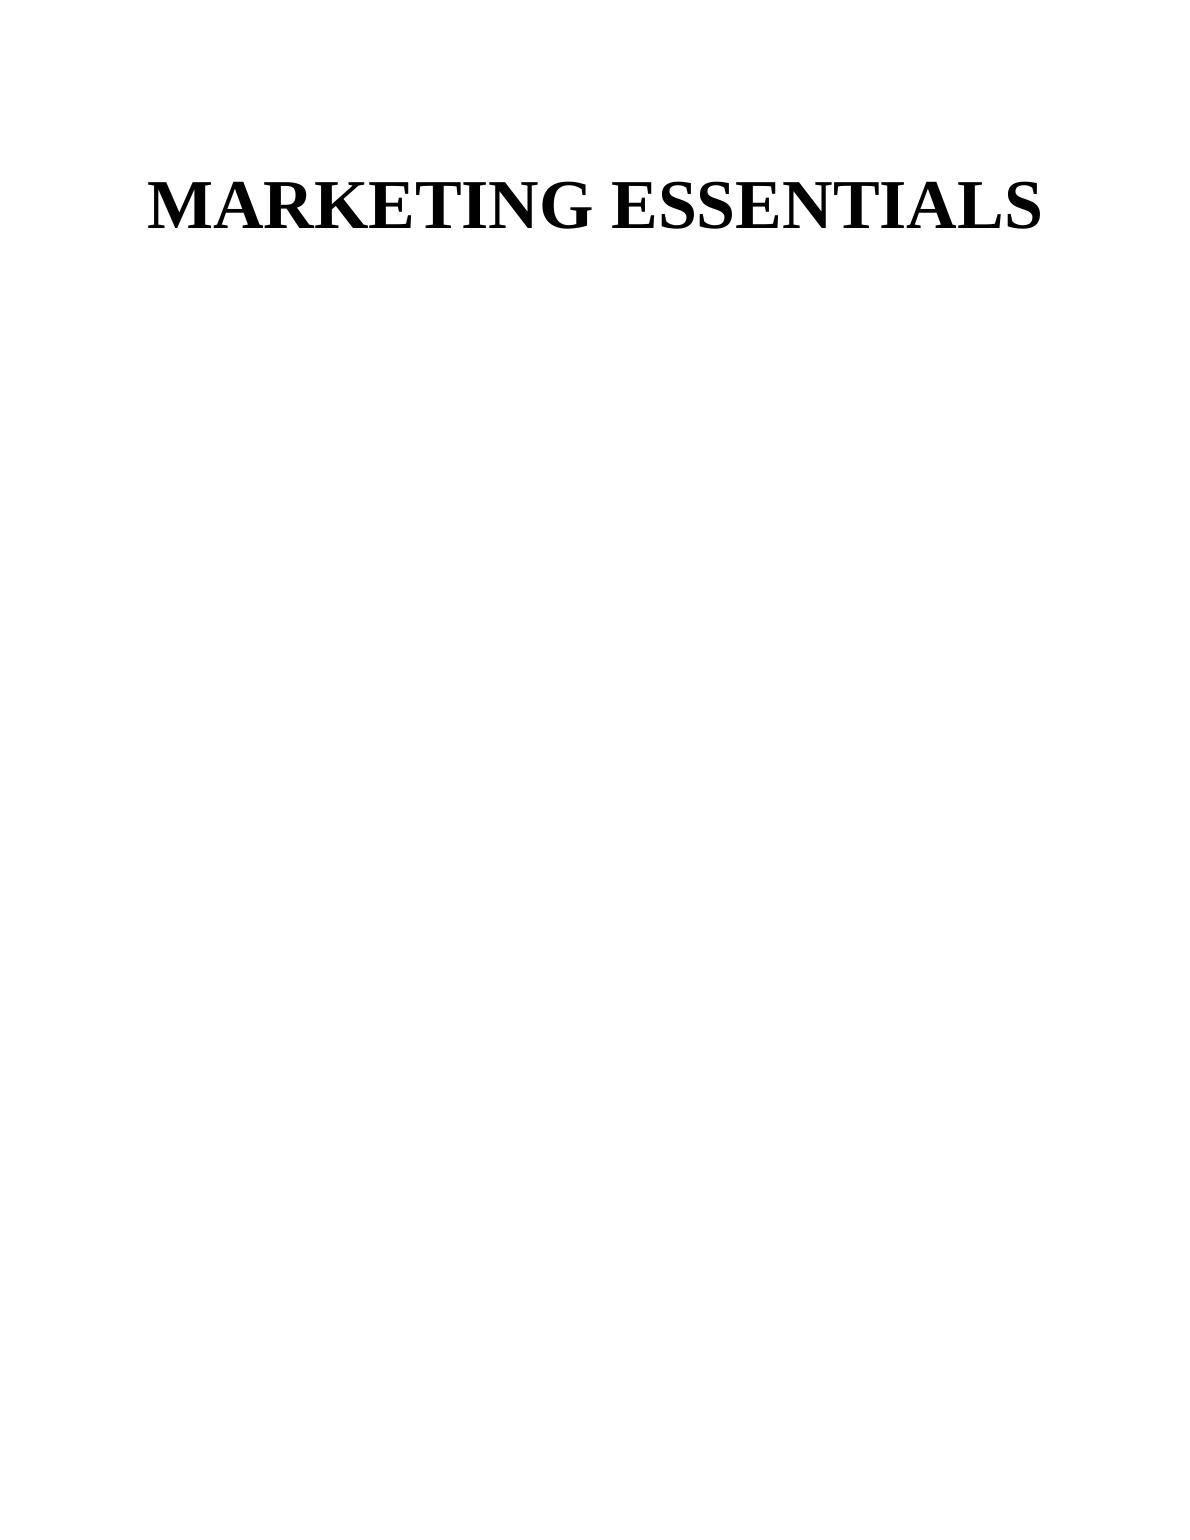 Marketing Essentials TABLE OF CONTENTS INTRODUCTION 1 TASK 11 P1. Major roles and responsibilities of marketing function of Wilkinson_1